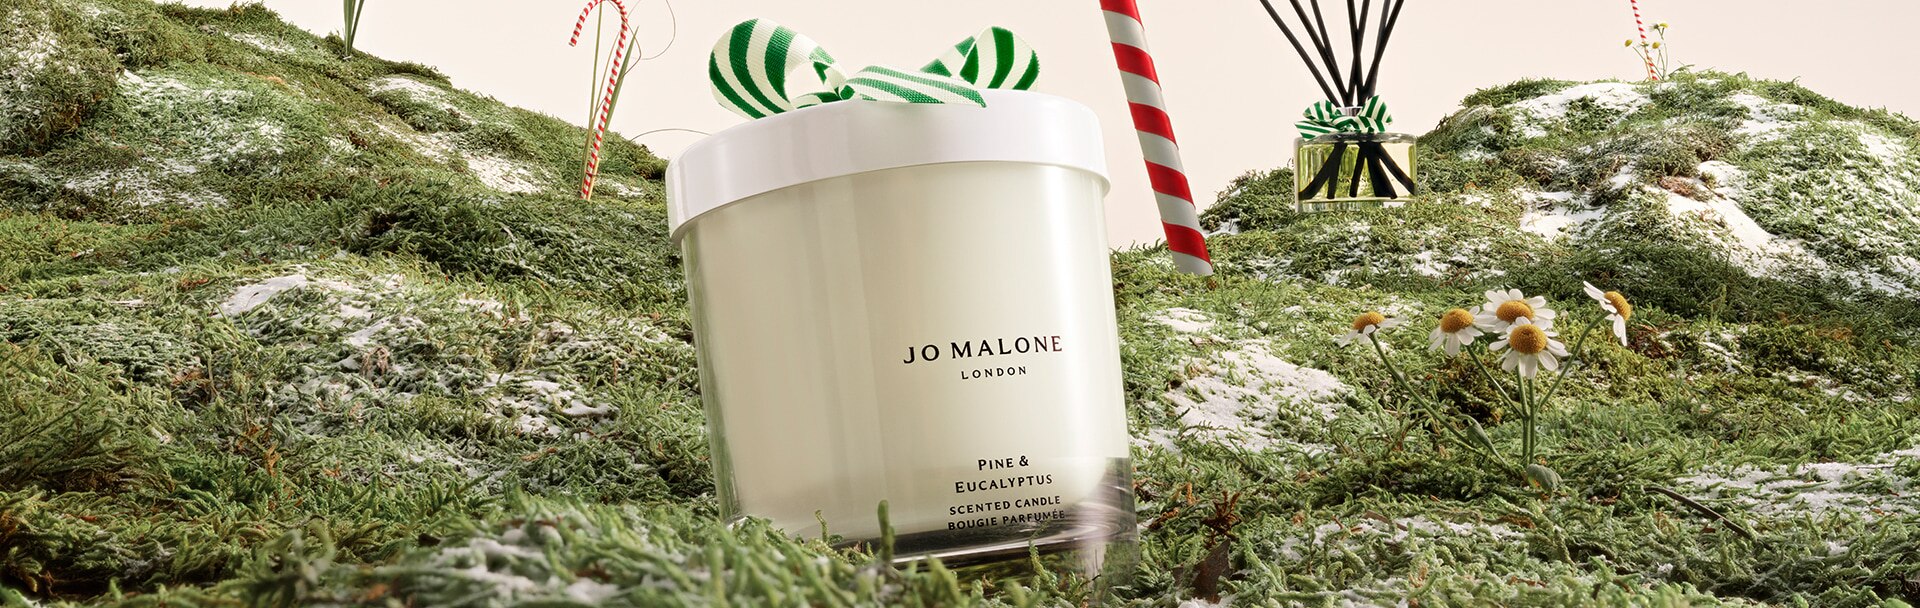 Jo Malone London Pine and Eucalyptus Home Candle and Diffuser on a bed of moss with candy canes